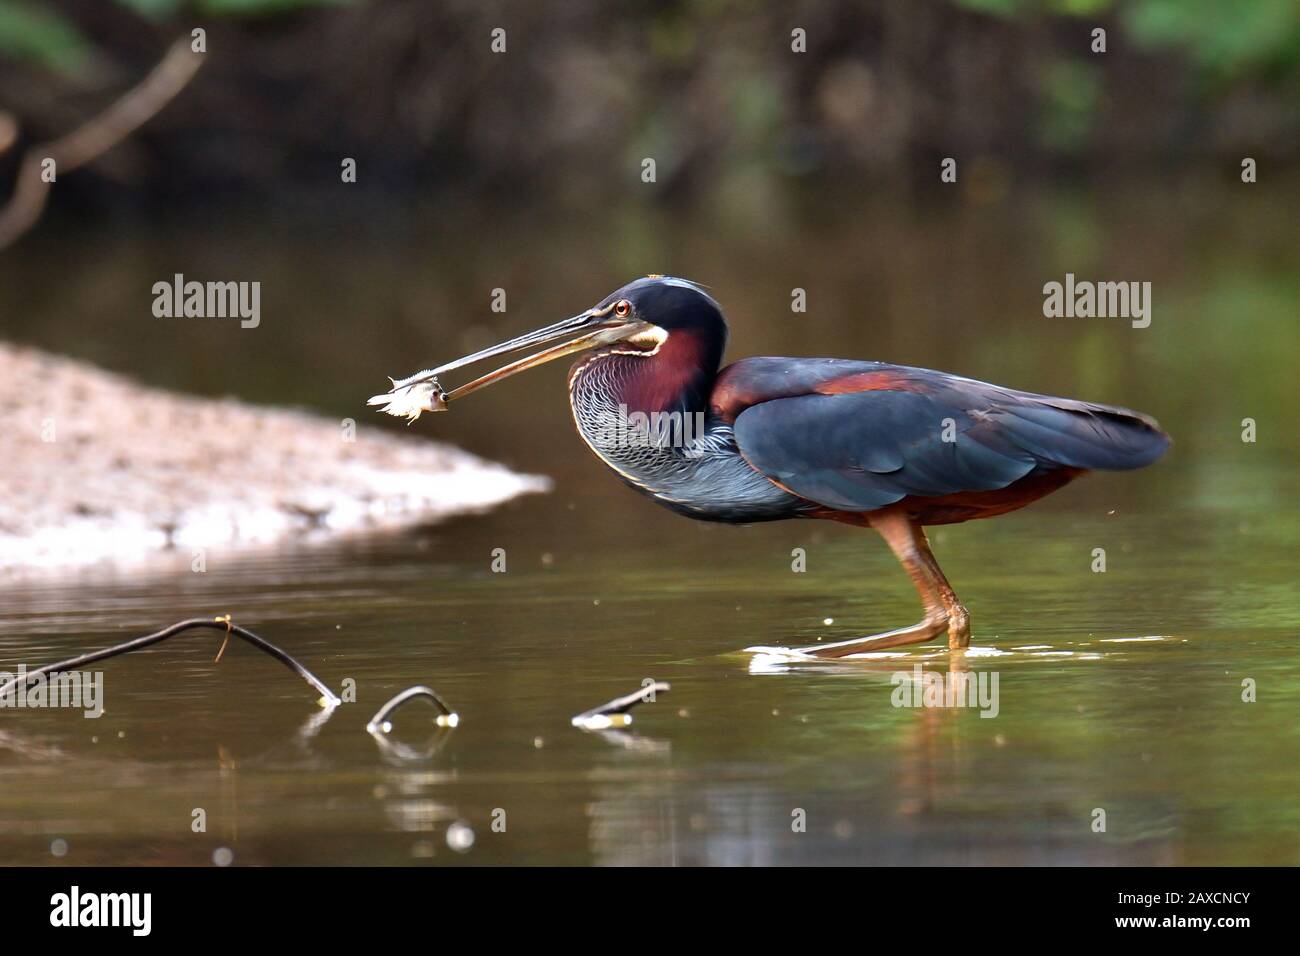 An Amazing Agami Heron in Caño Negro National Wildlife Refuge. This heron is the most rare and beautiful heron of the Central and south America. Stock Photo